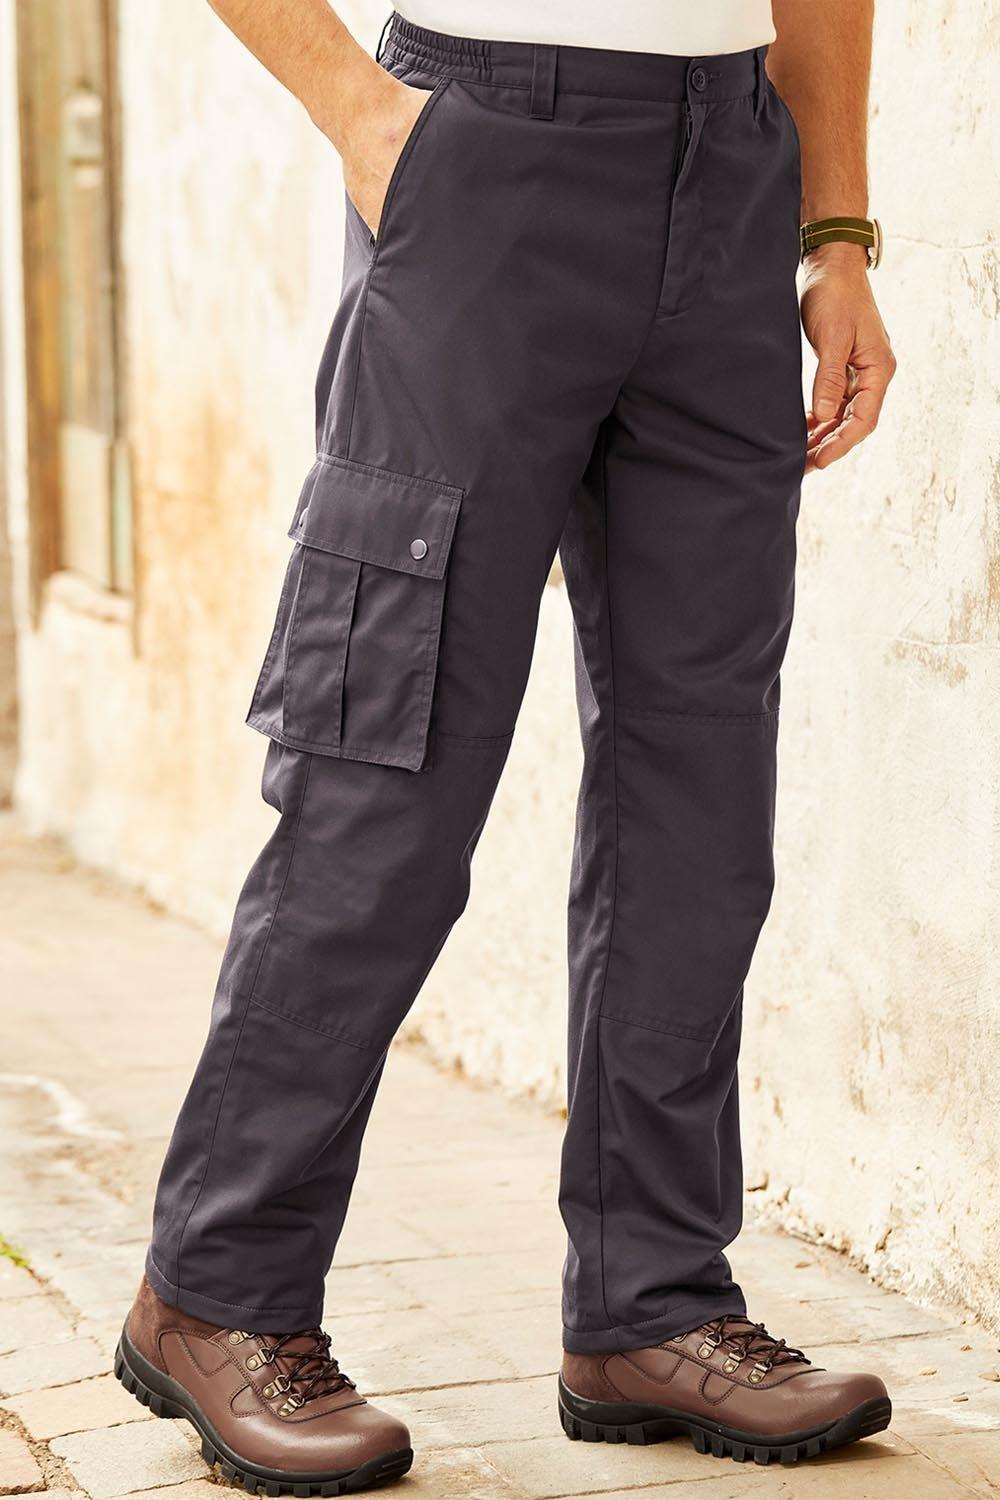 Thermal Leisure Trousers at Cotton Traders